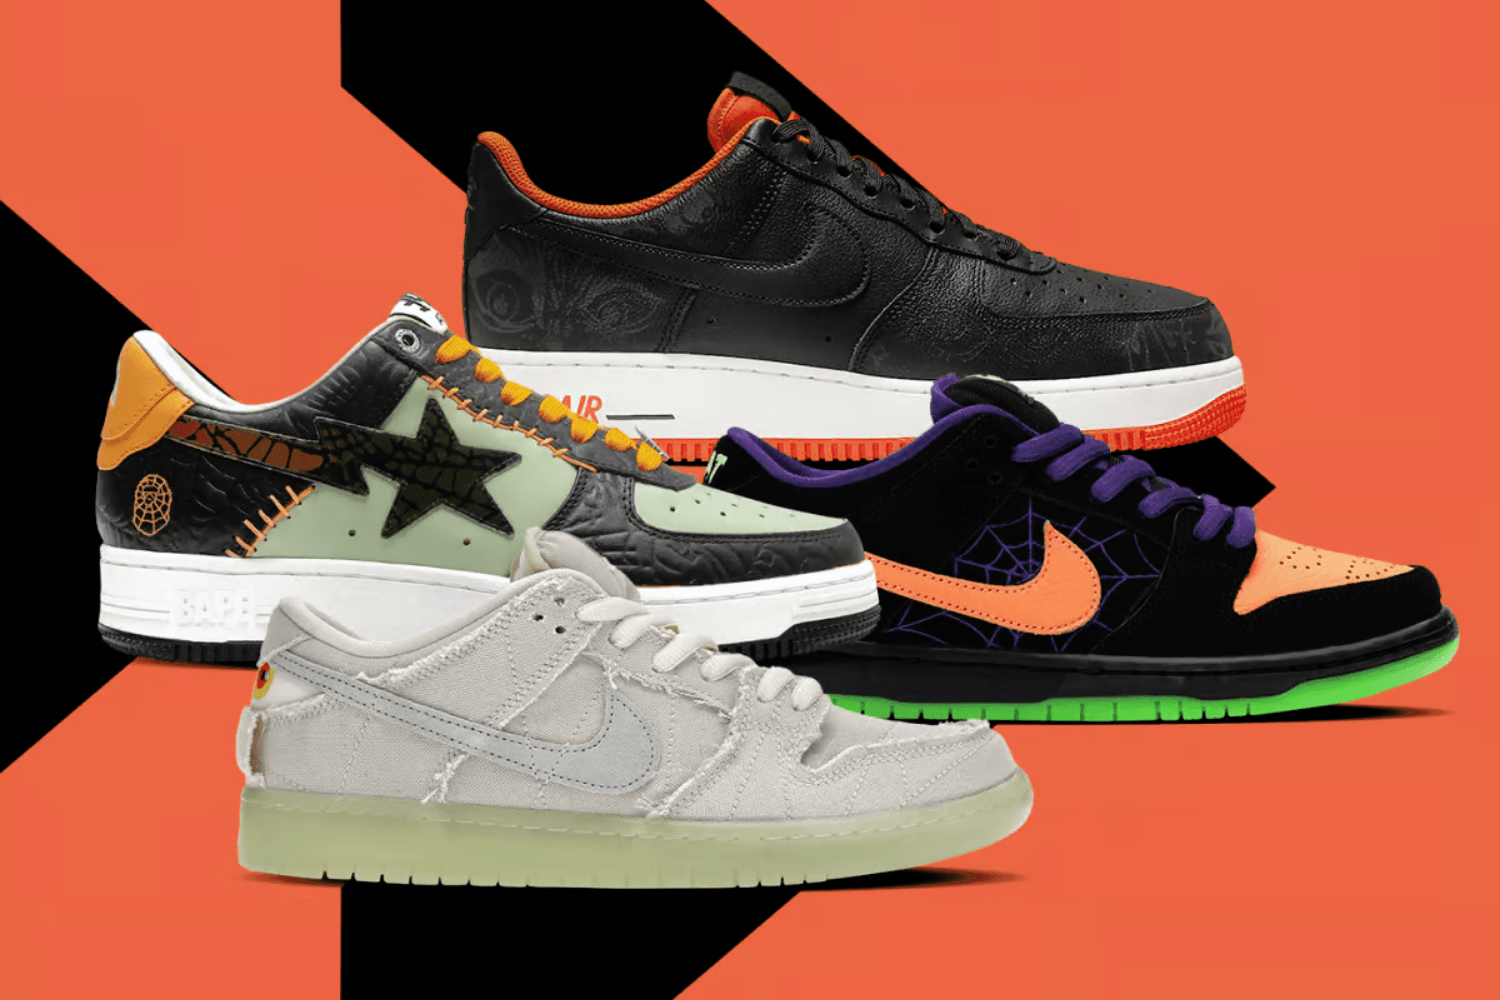 Discover the spookiest Halloween sneaker designs at StockX